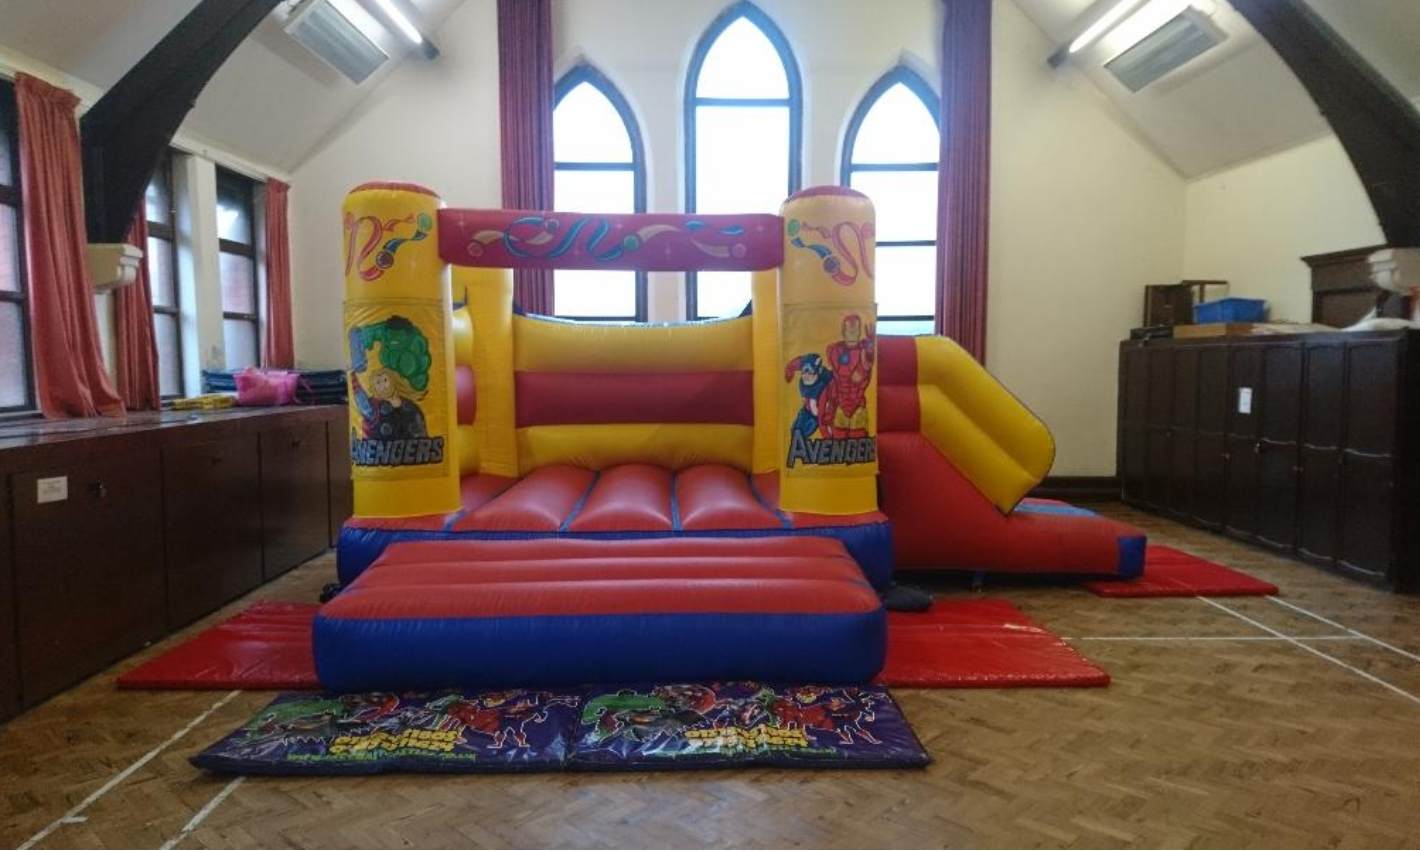 Indoor Only Castle Red & Yellow With Side Slide The Avengers